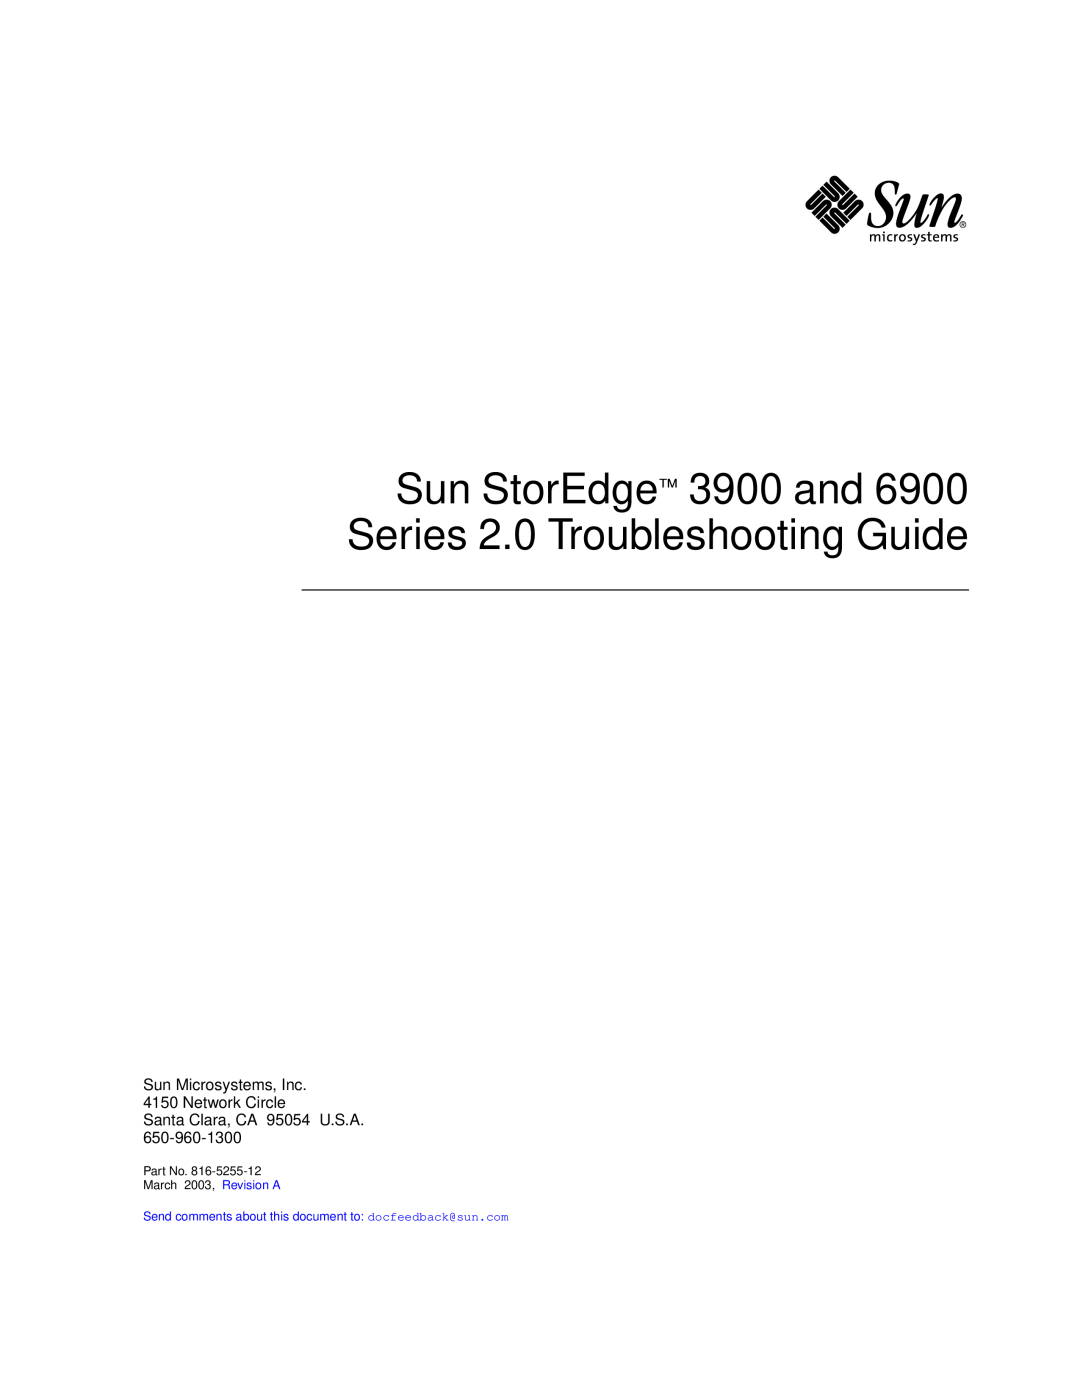 Sun Microsystems manual Sun StorEdge 3900 and 6900 Series 2.0 Troubleshooting Guide, March 2003, Revision A 